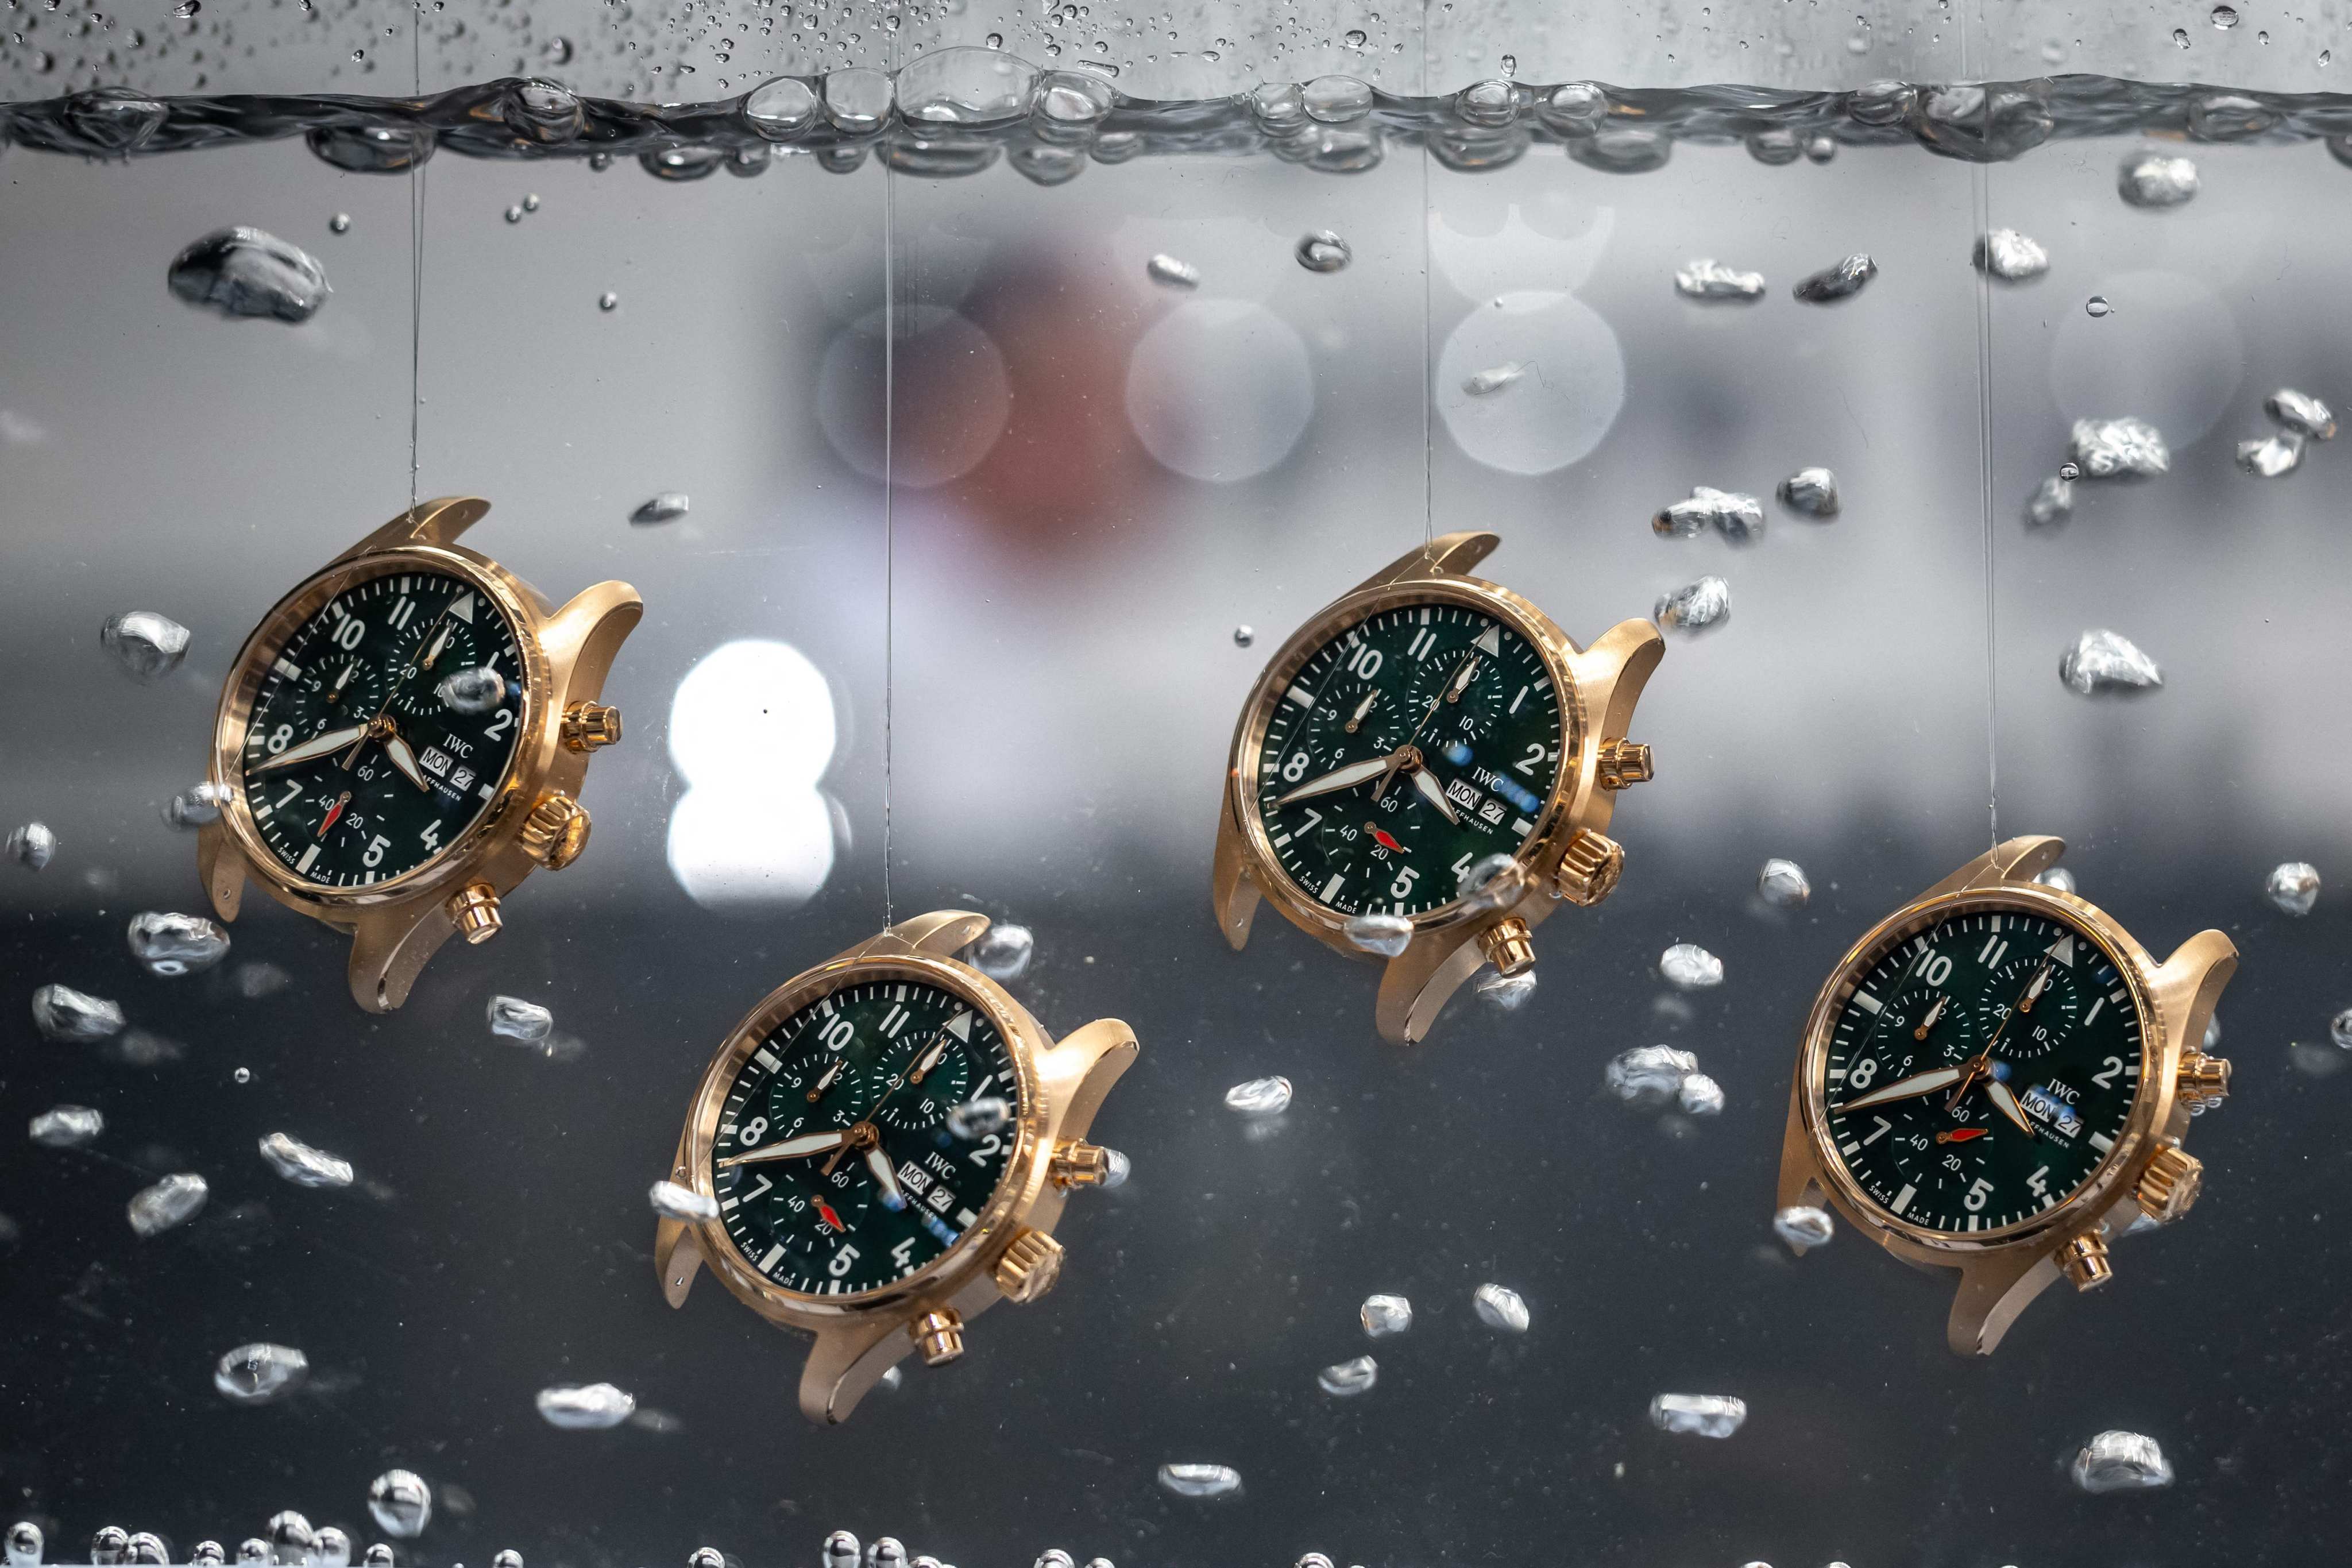 Watches are seen in water at the booth of Swiss watch manufacturer IWC on the opening day of the luxury watch fair Watches and Wonders, on March 27, in Geneva. Photo: AFP